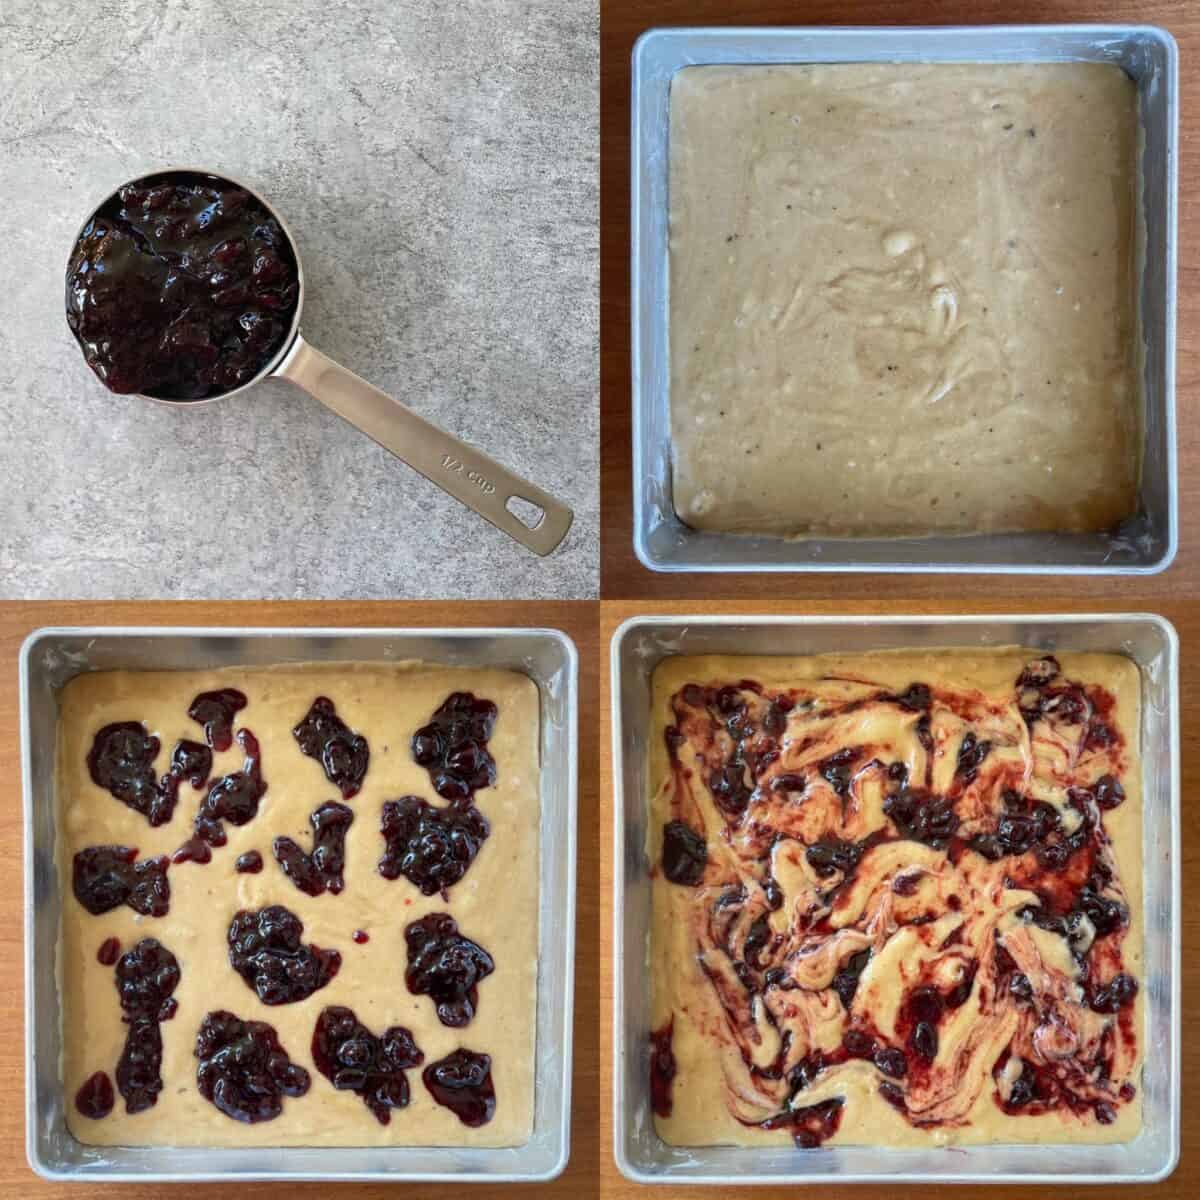 four panels showing the steps in swirling the cherry jam into the blondie batter.